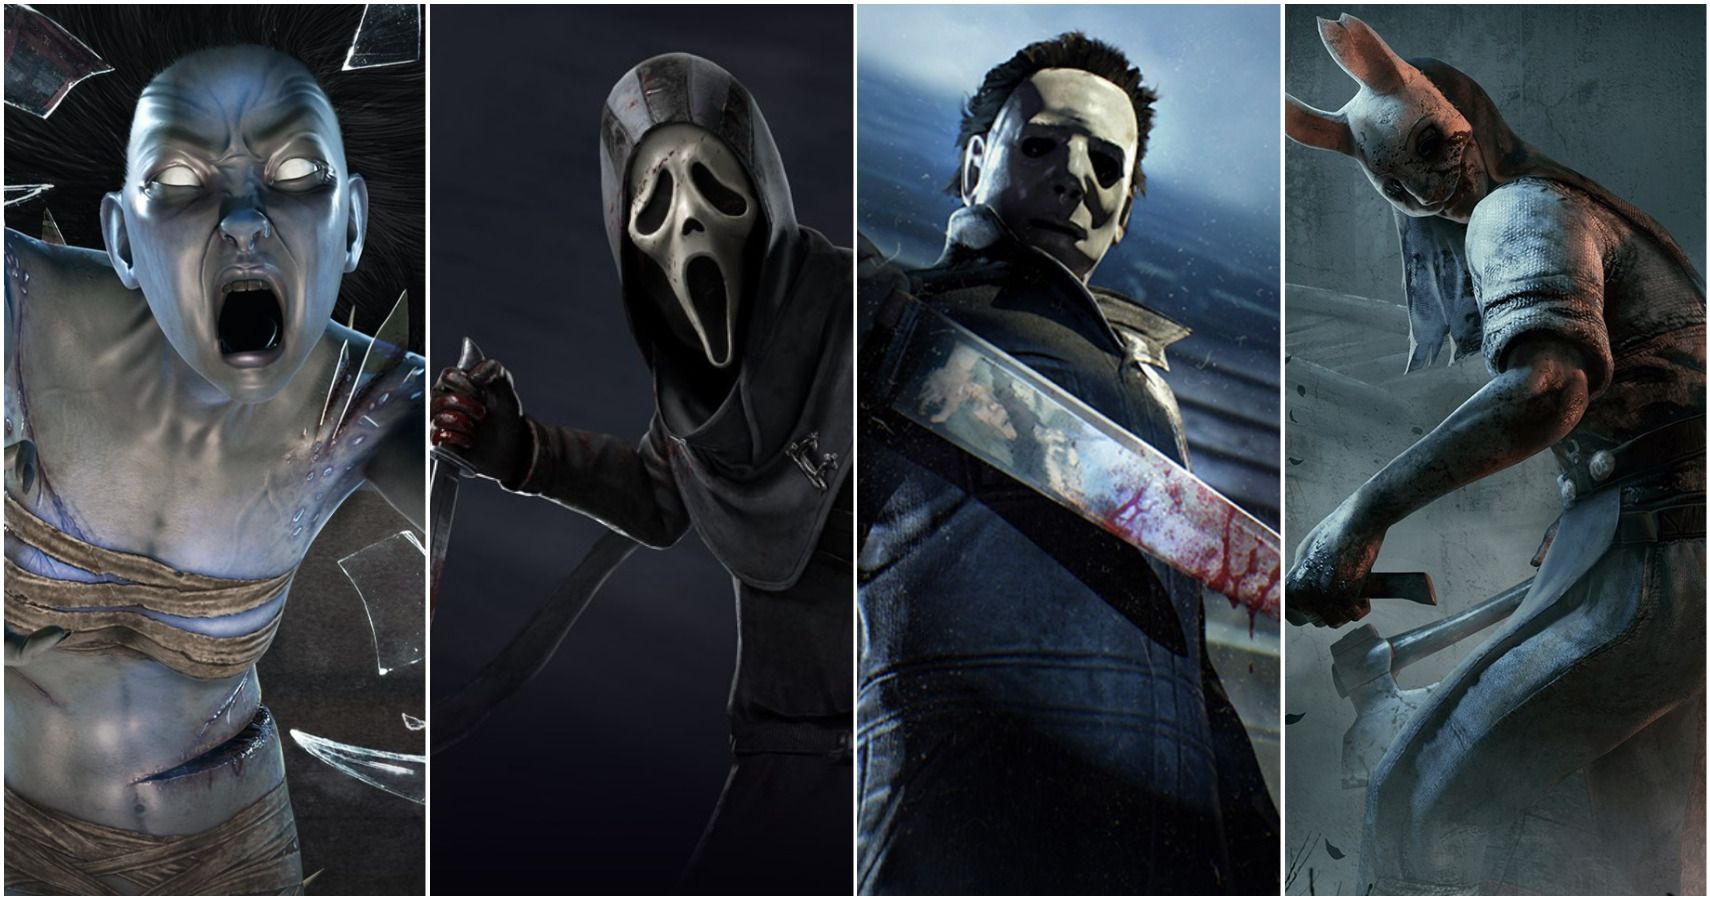 dead by daylight 10 best killers to play ranked cbr dead by daylight 10 best killers to